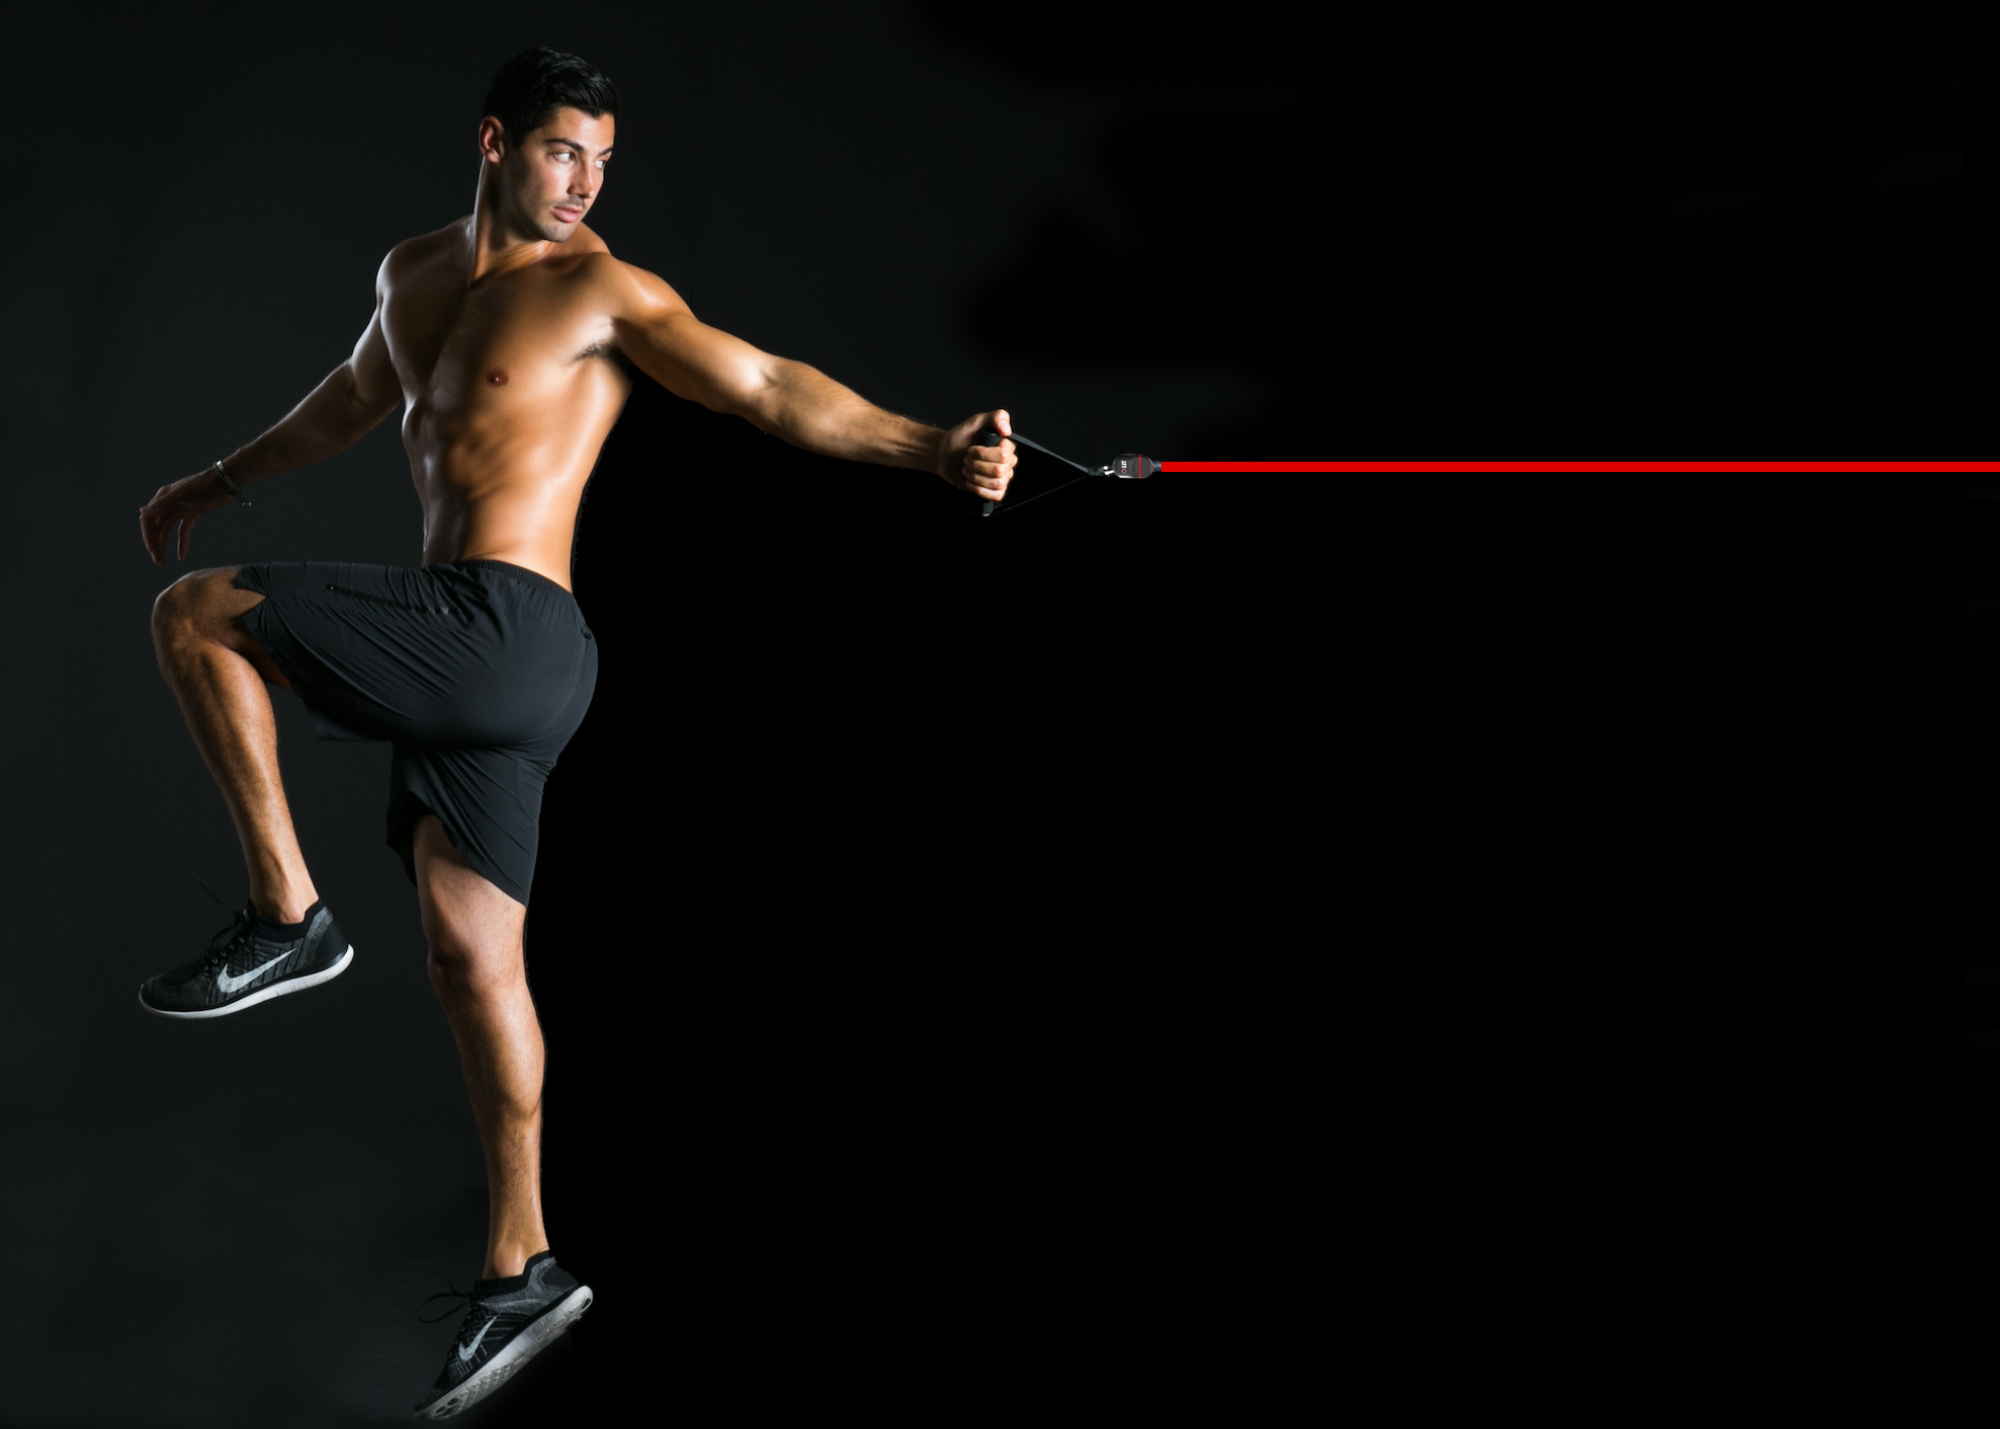 effective are resistance bands